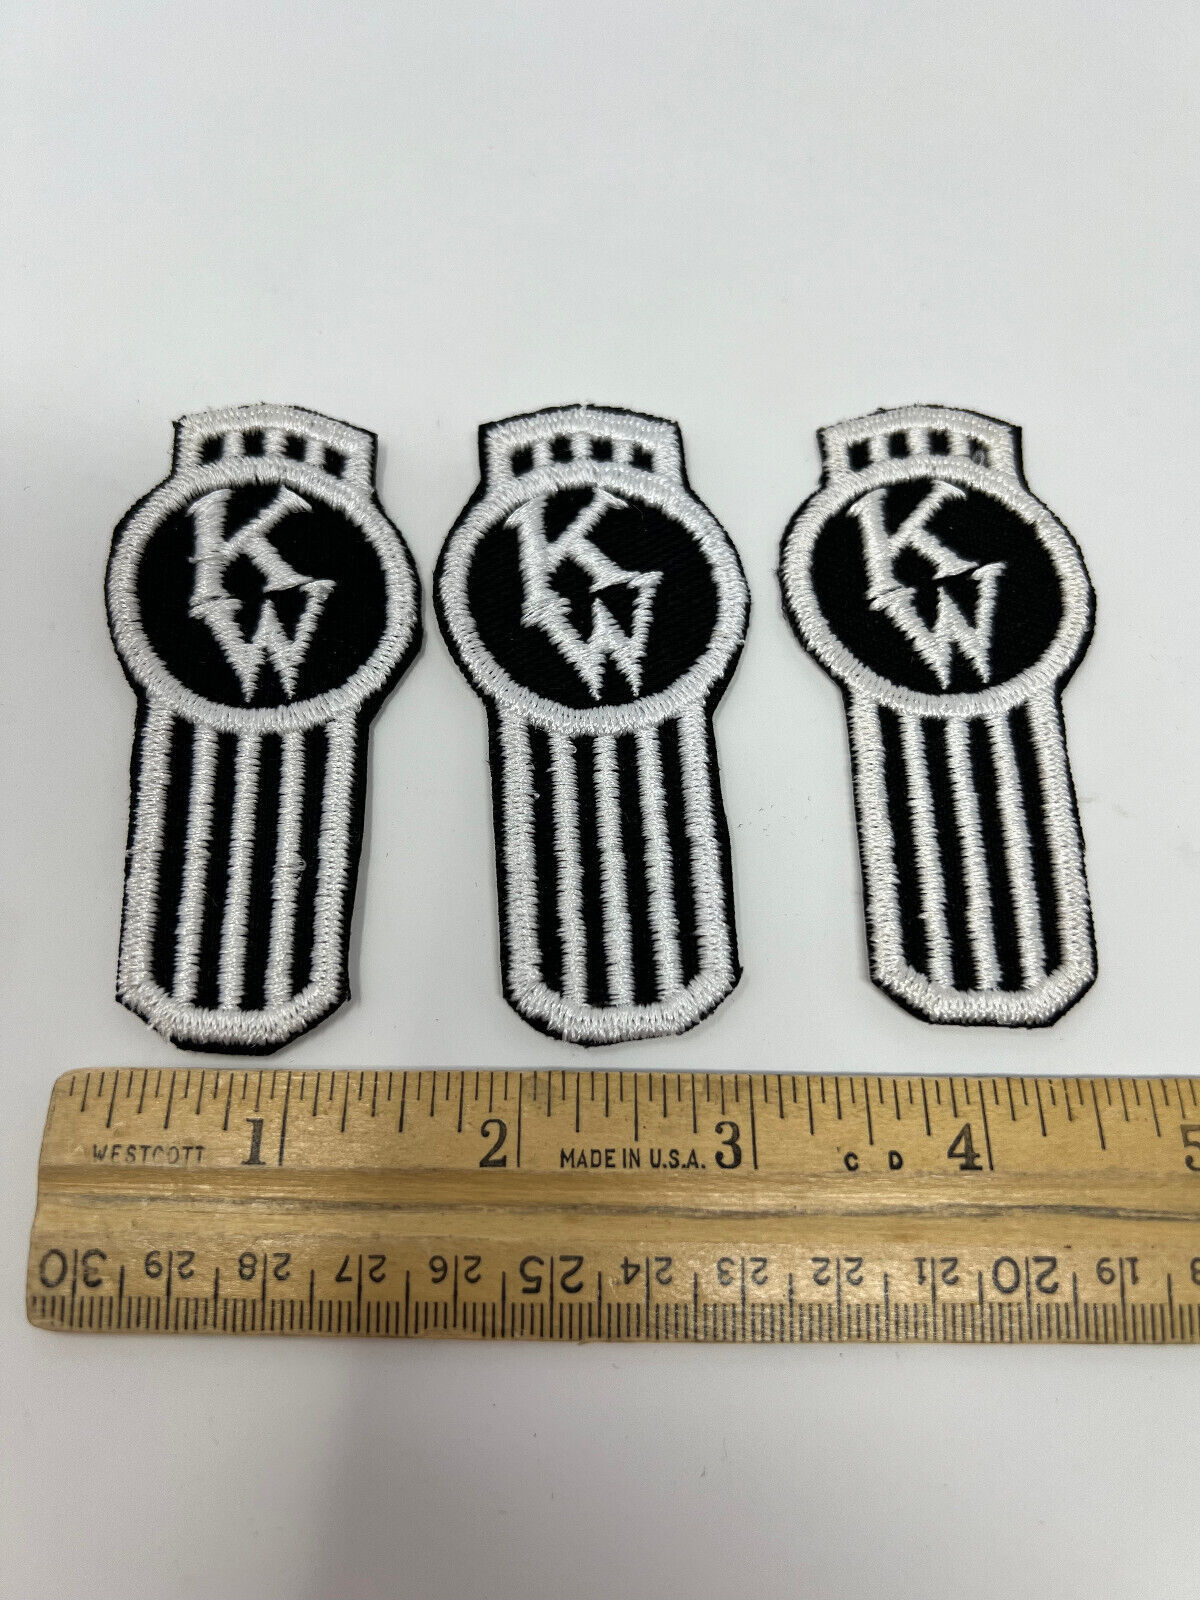 x 3 Vintage Kenworth truckers patches emblems embroidered